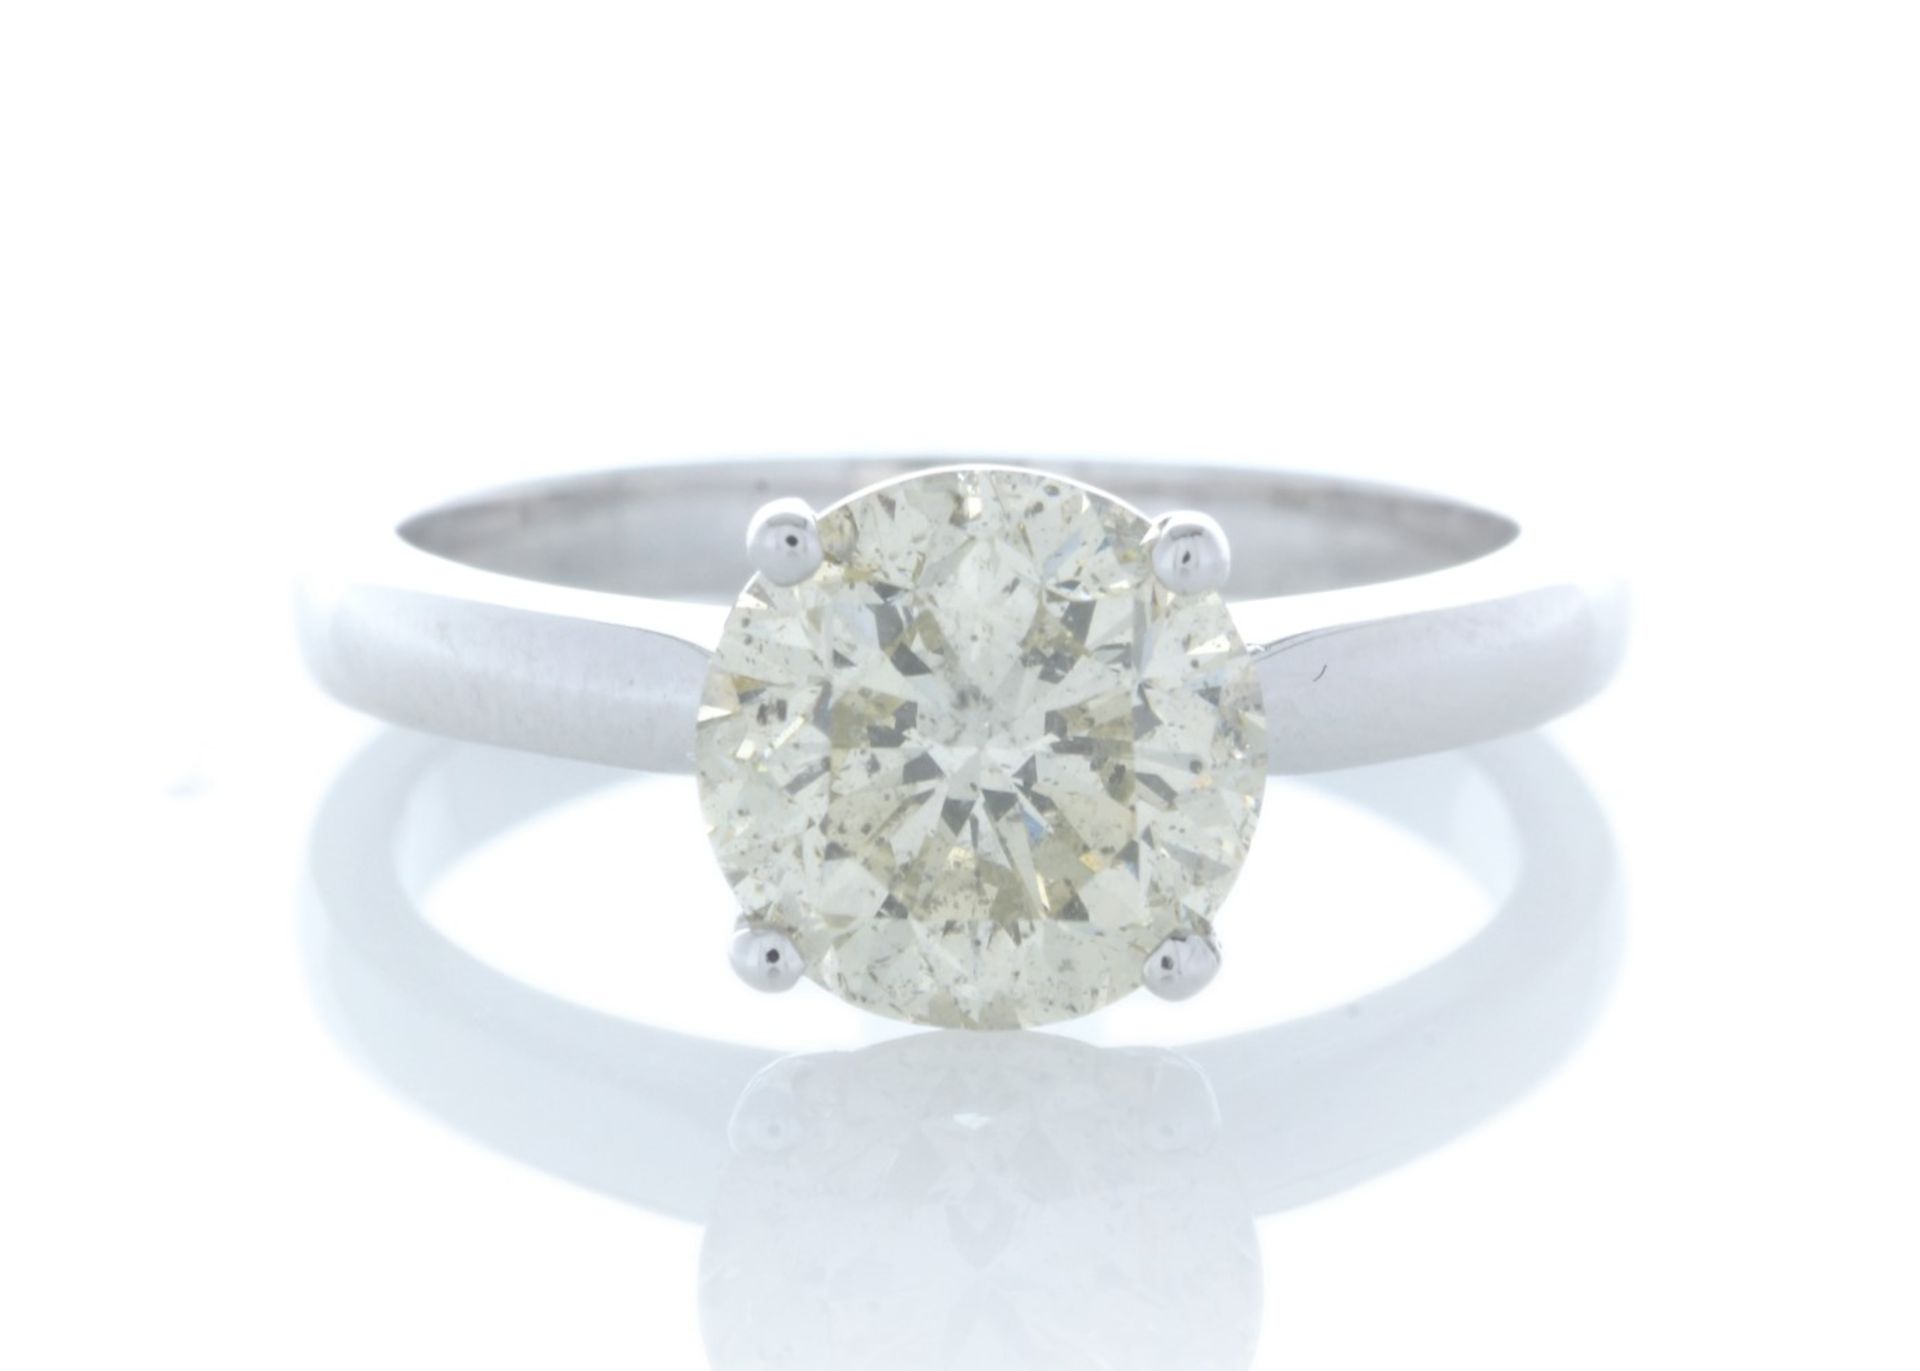 18ct White Gold Single Stone Rex Set Diamond Ring 2.29 Carats - Valued By GIE £24,315.00 - A massive